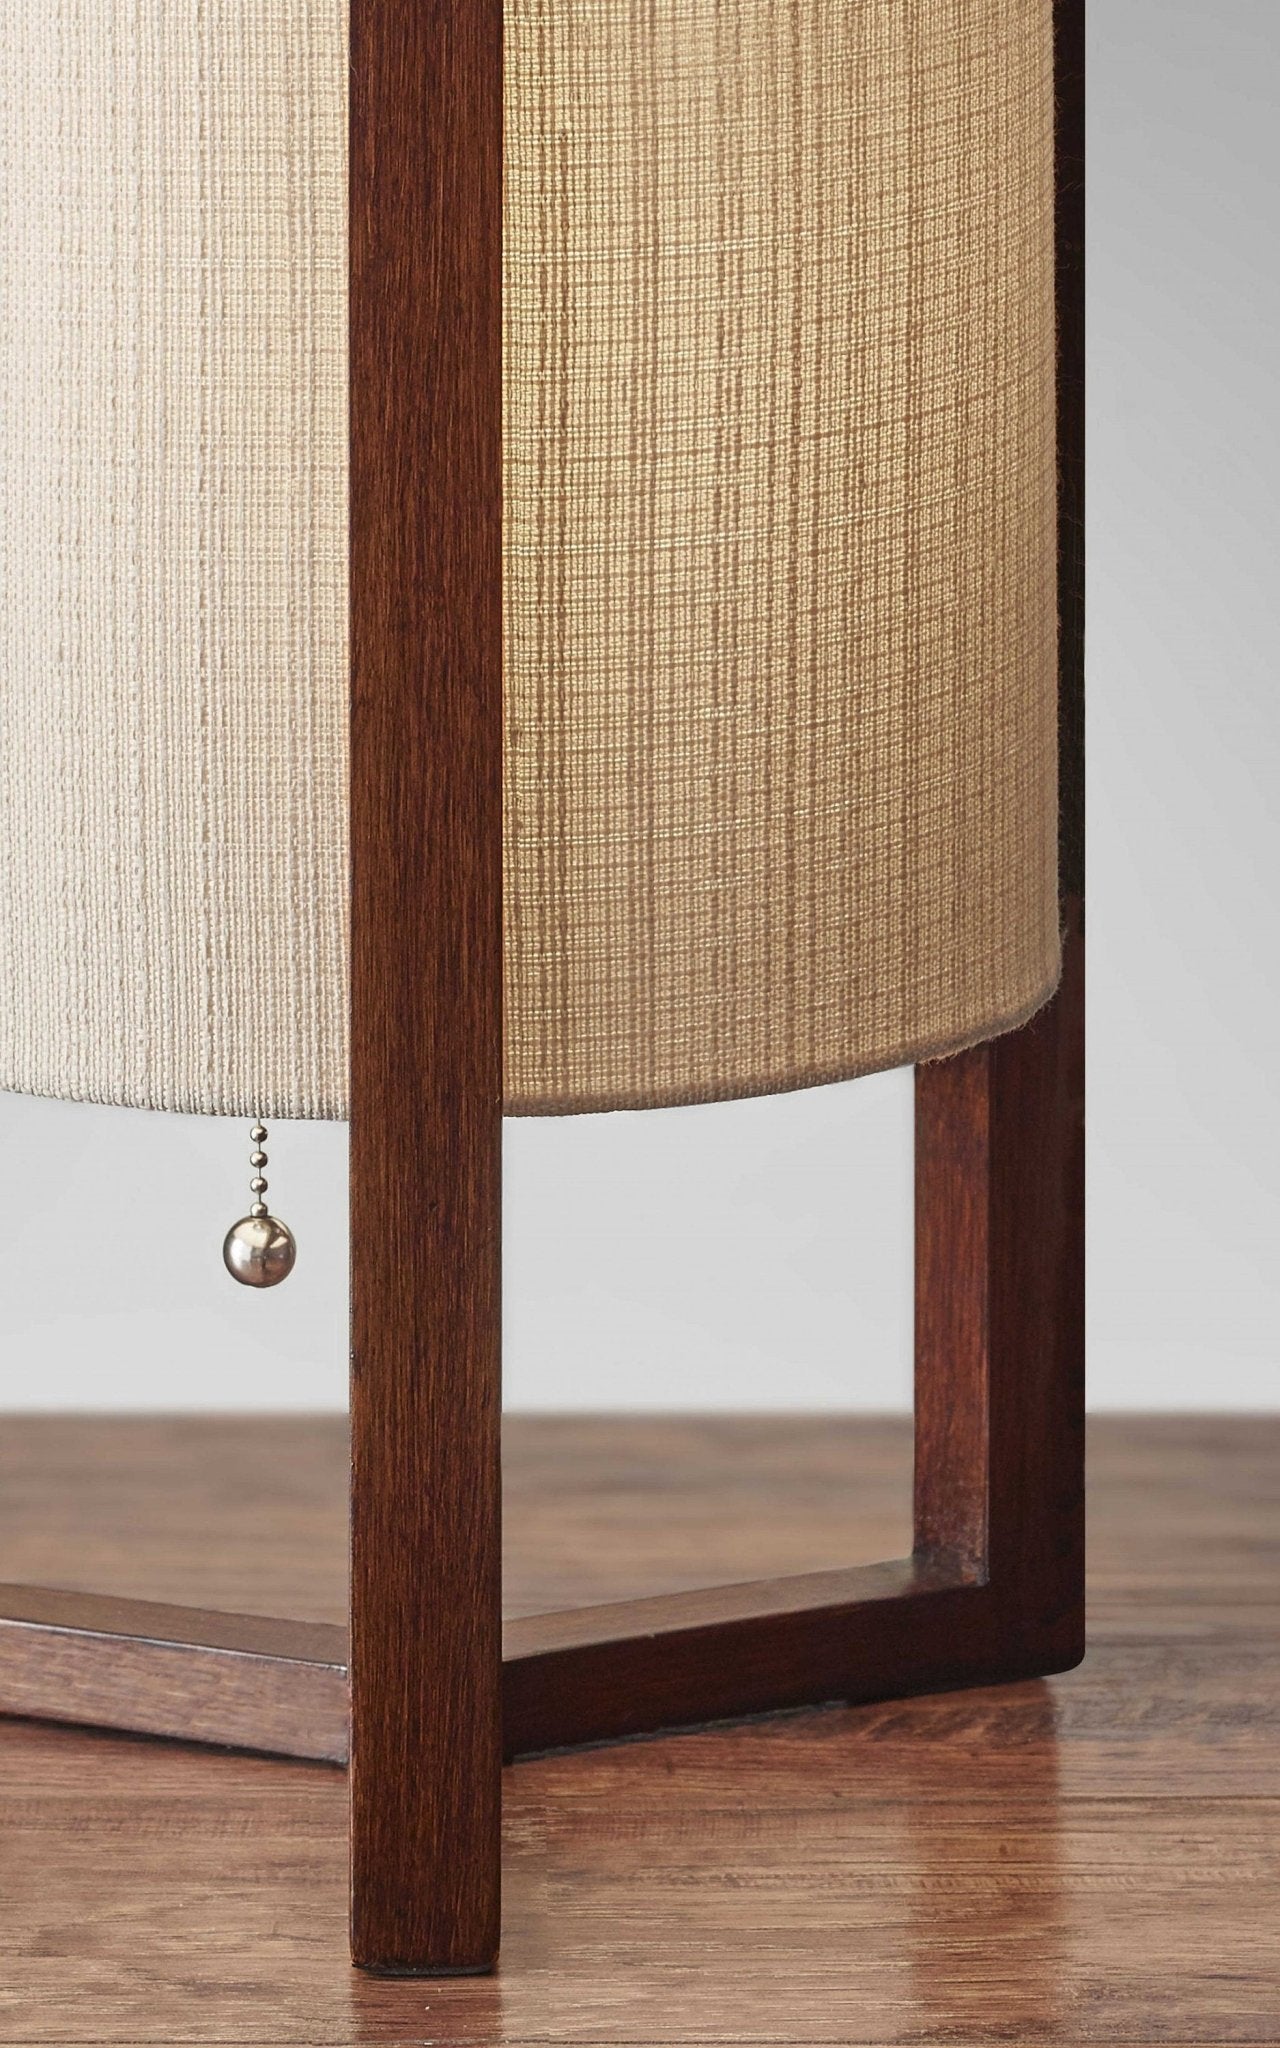 Wood Cylindric Table Lamp With Linen Shades | Walnut Birch Wood, Mid Century Table Lamp, Japanese, Scandinavian, Desk Lamp, Bedside Light - TABLE LAMP -